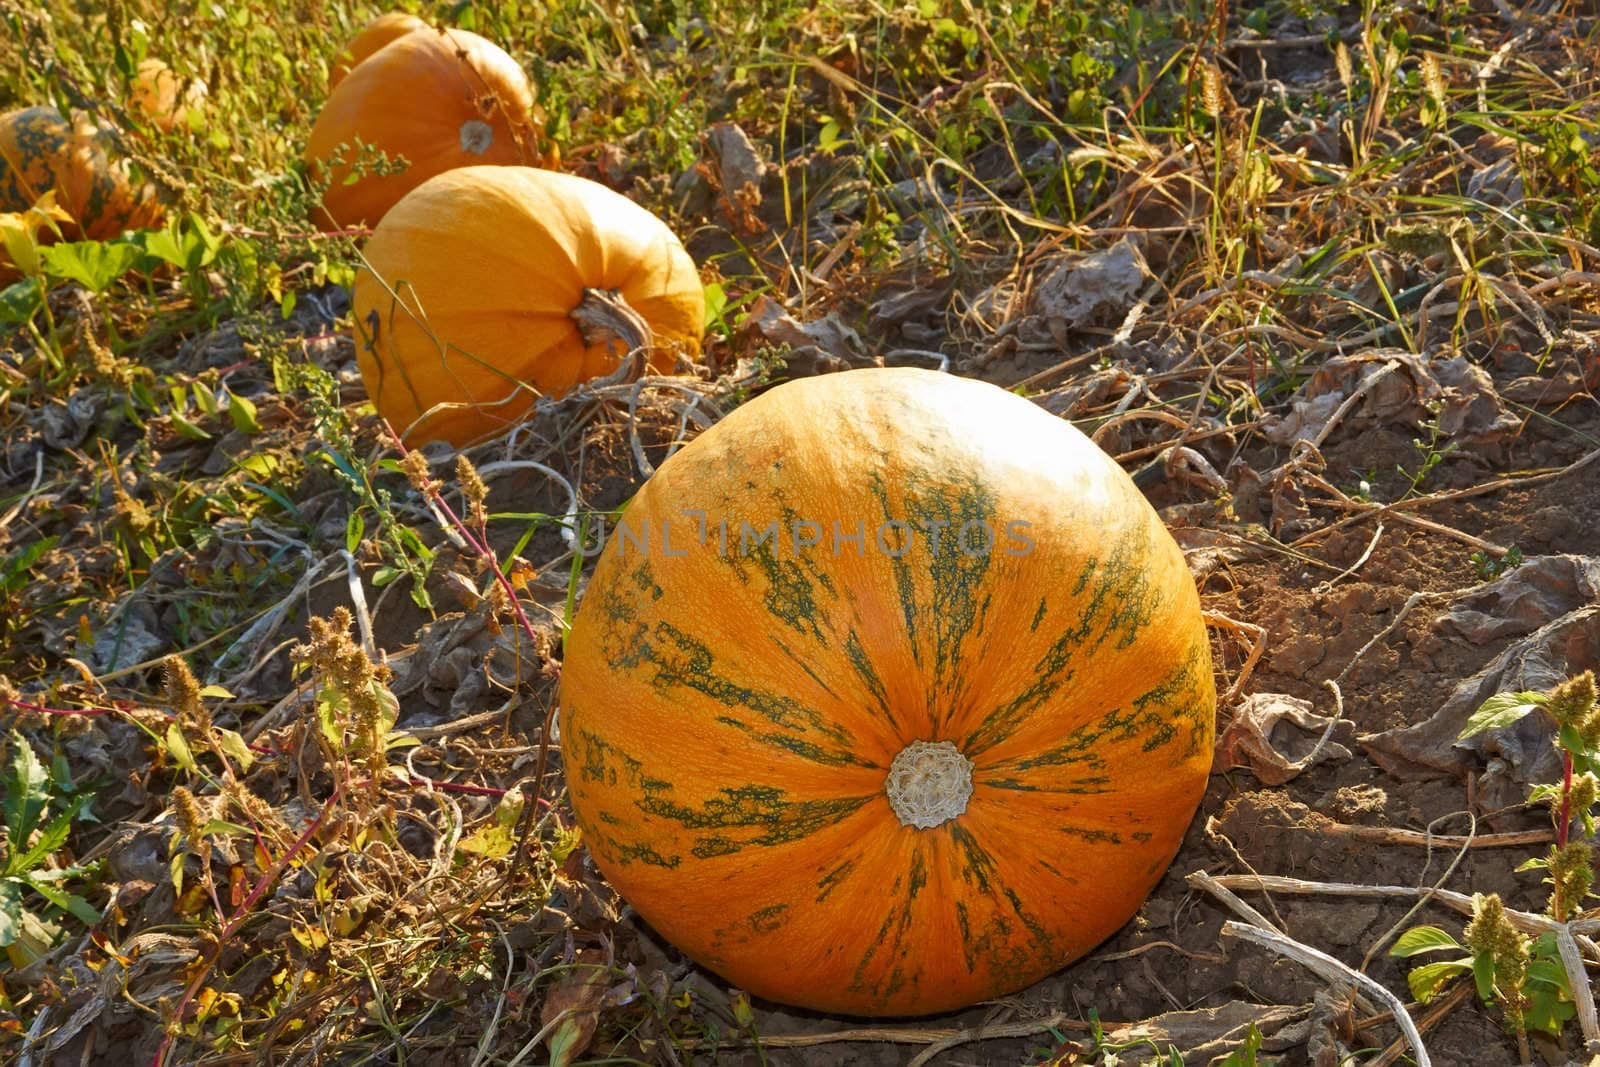 Big pumpkins ripe fruit in the garden among the dried weeds